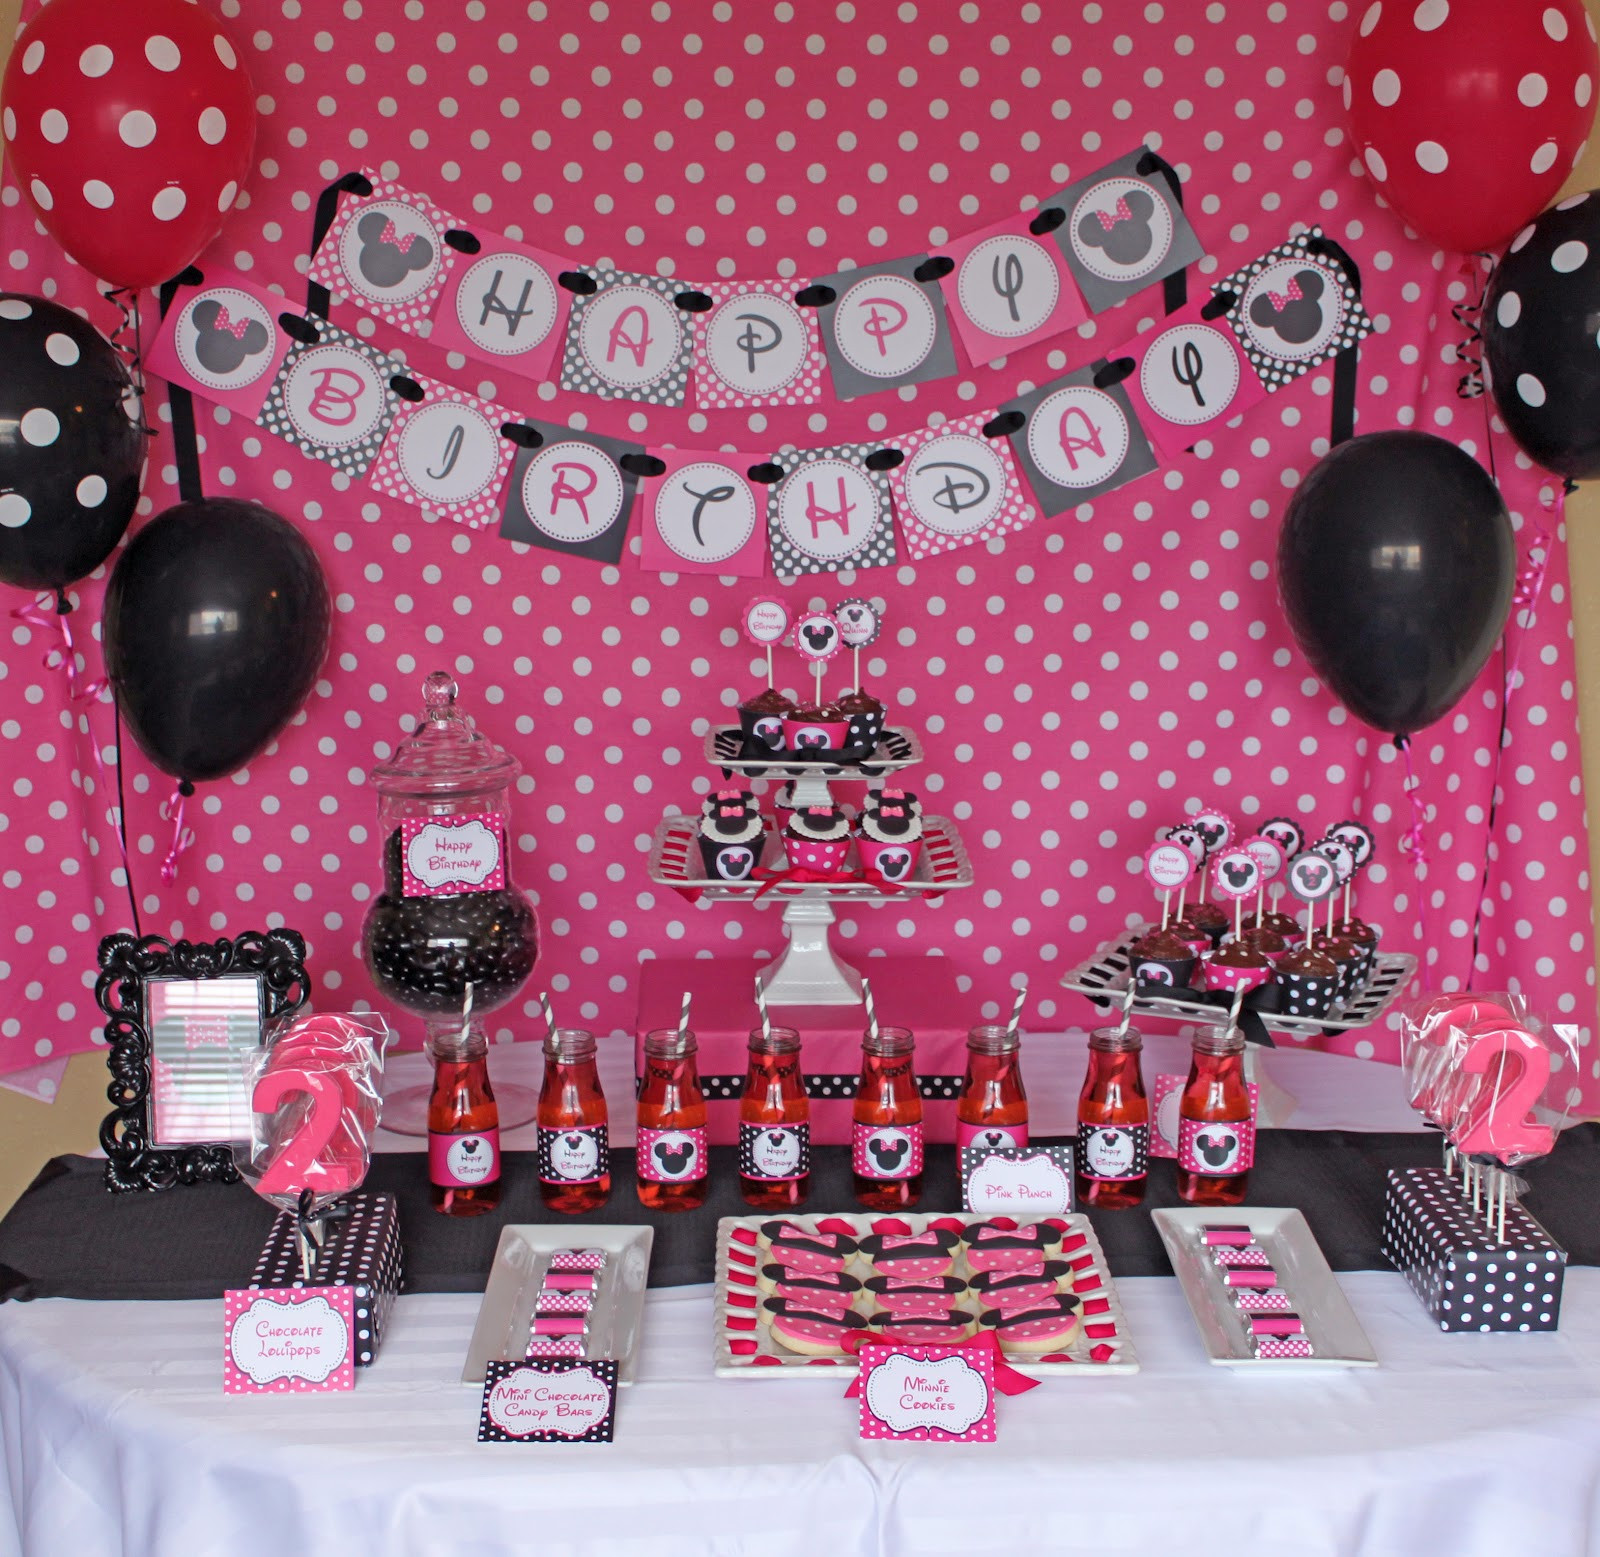 Minnie Mouse Birthday Party Decoration Ideas
 Minnie Mouse Party Decorations